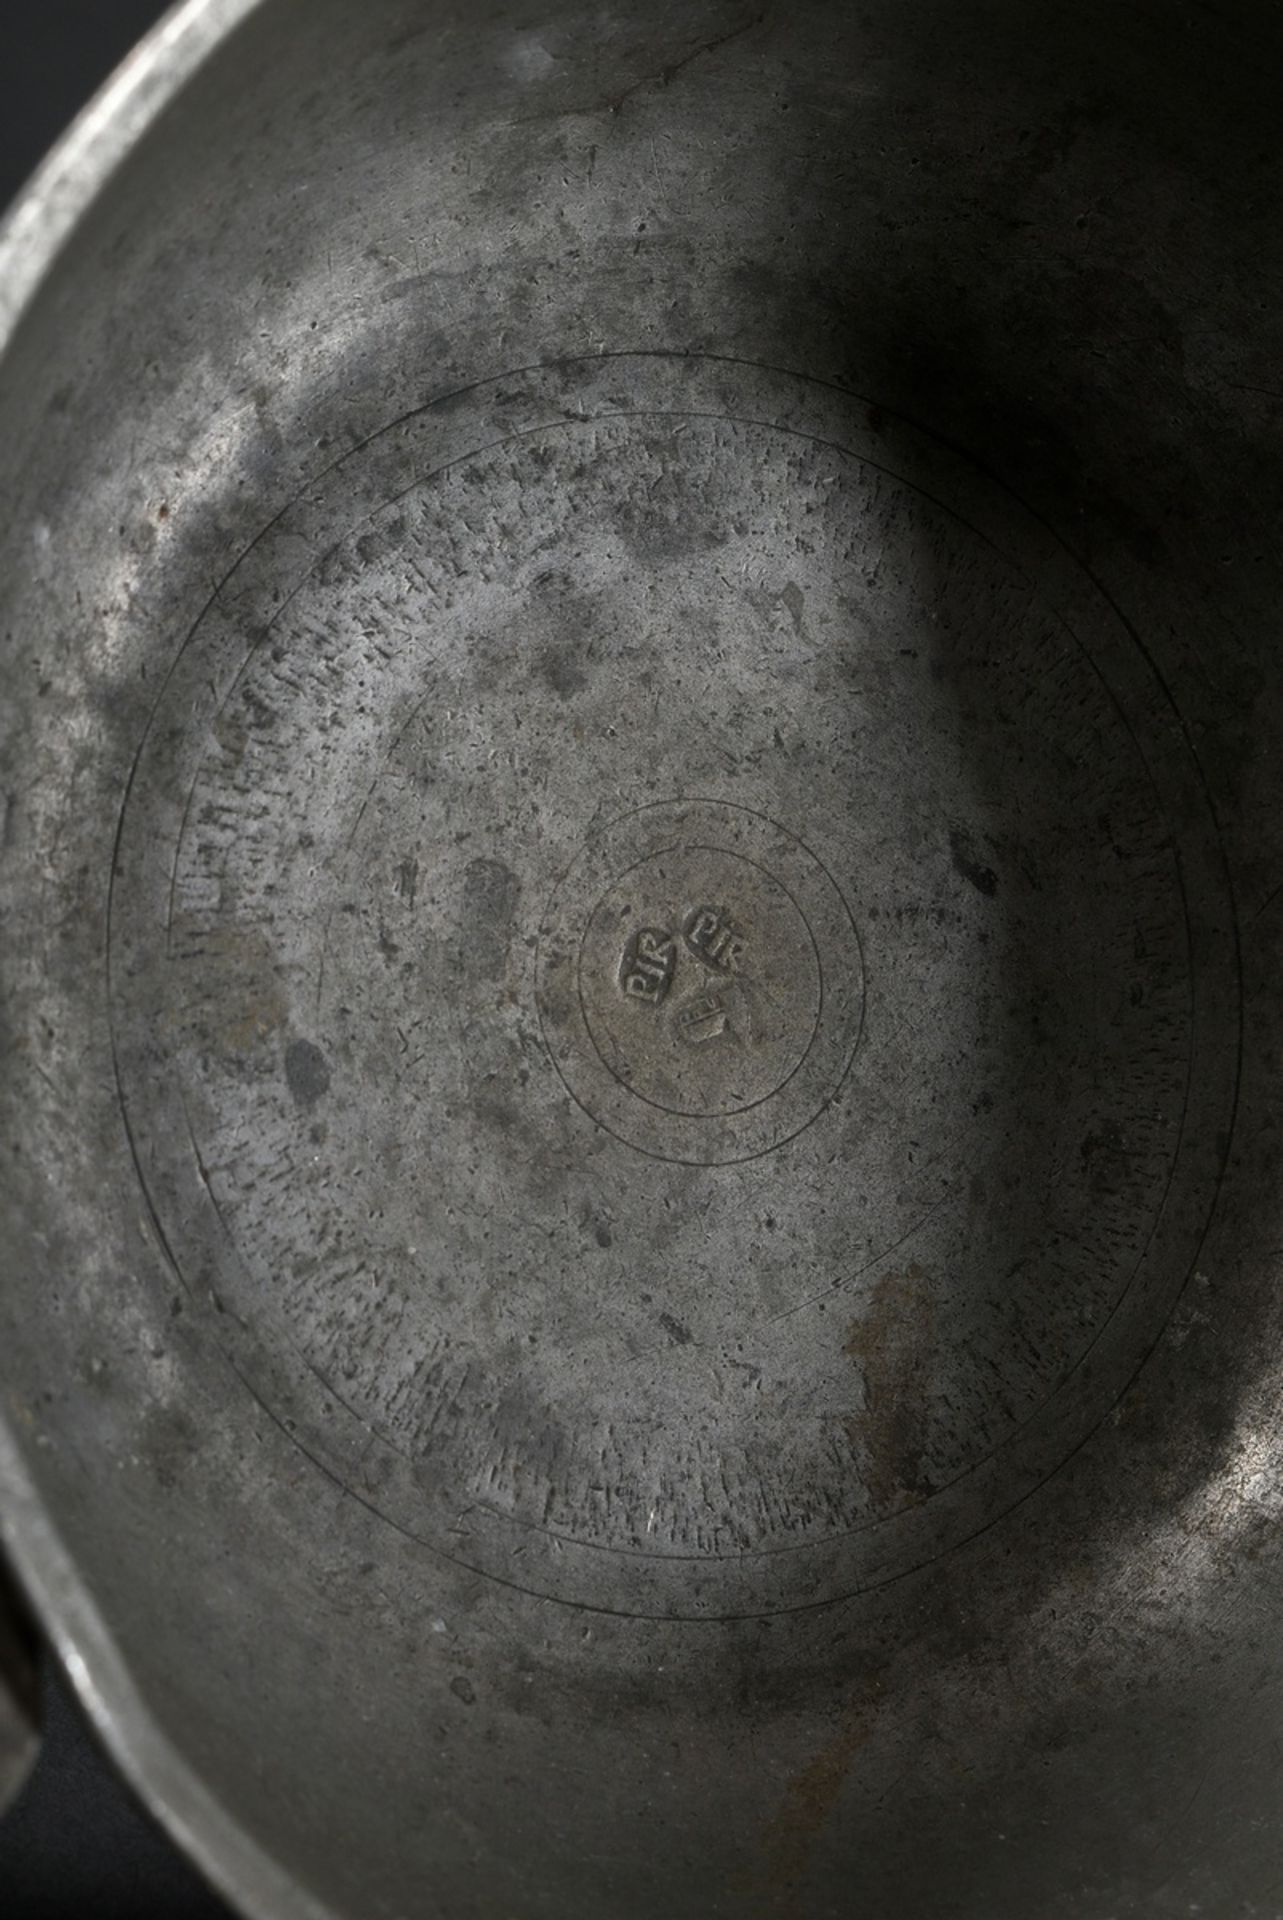 North German pewter ear bowl or maternity bowl with symmetrical openwork handles, on the bottom eng - Image 3 of 6